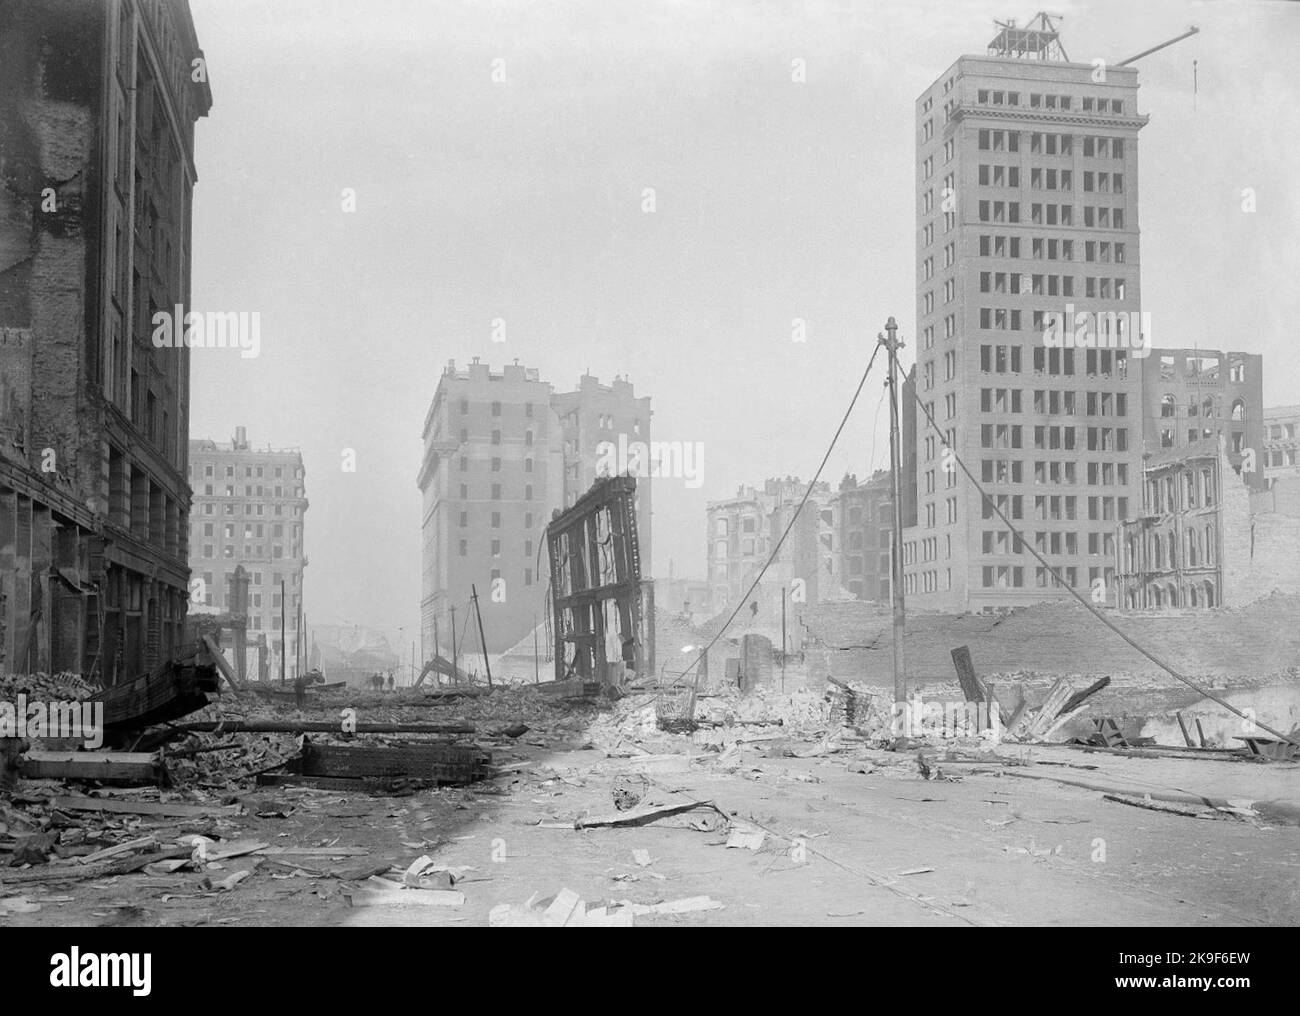 Edith Irvine - The Skeleton of Montgomery Street after San Francisco Earthquake 1906 Stock Photo